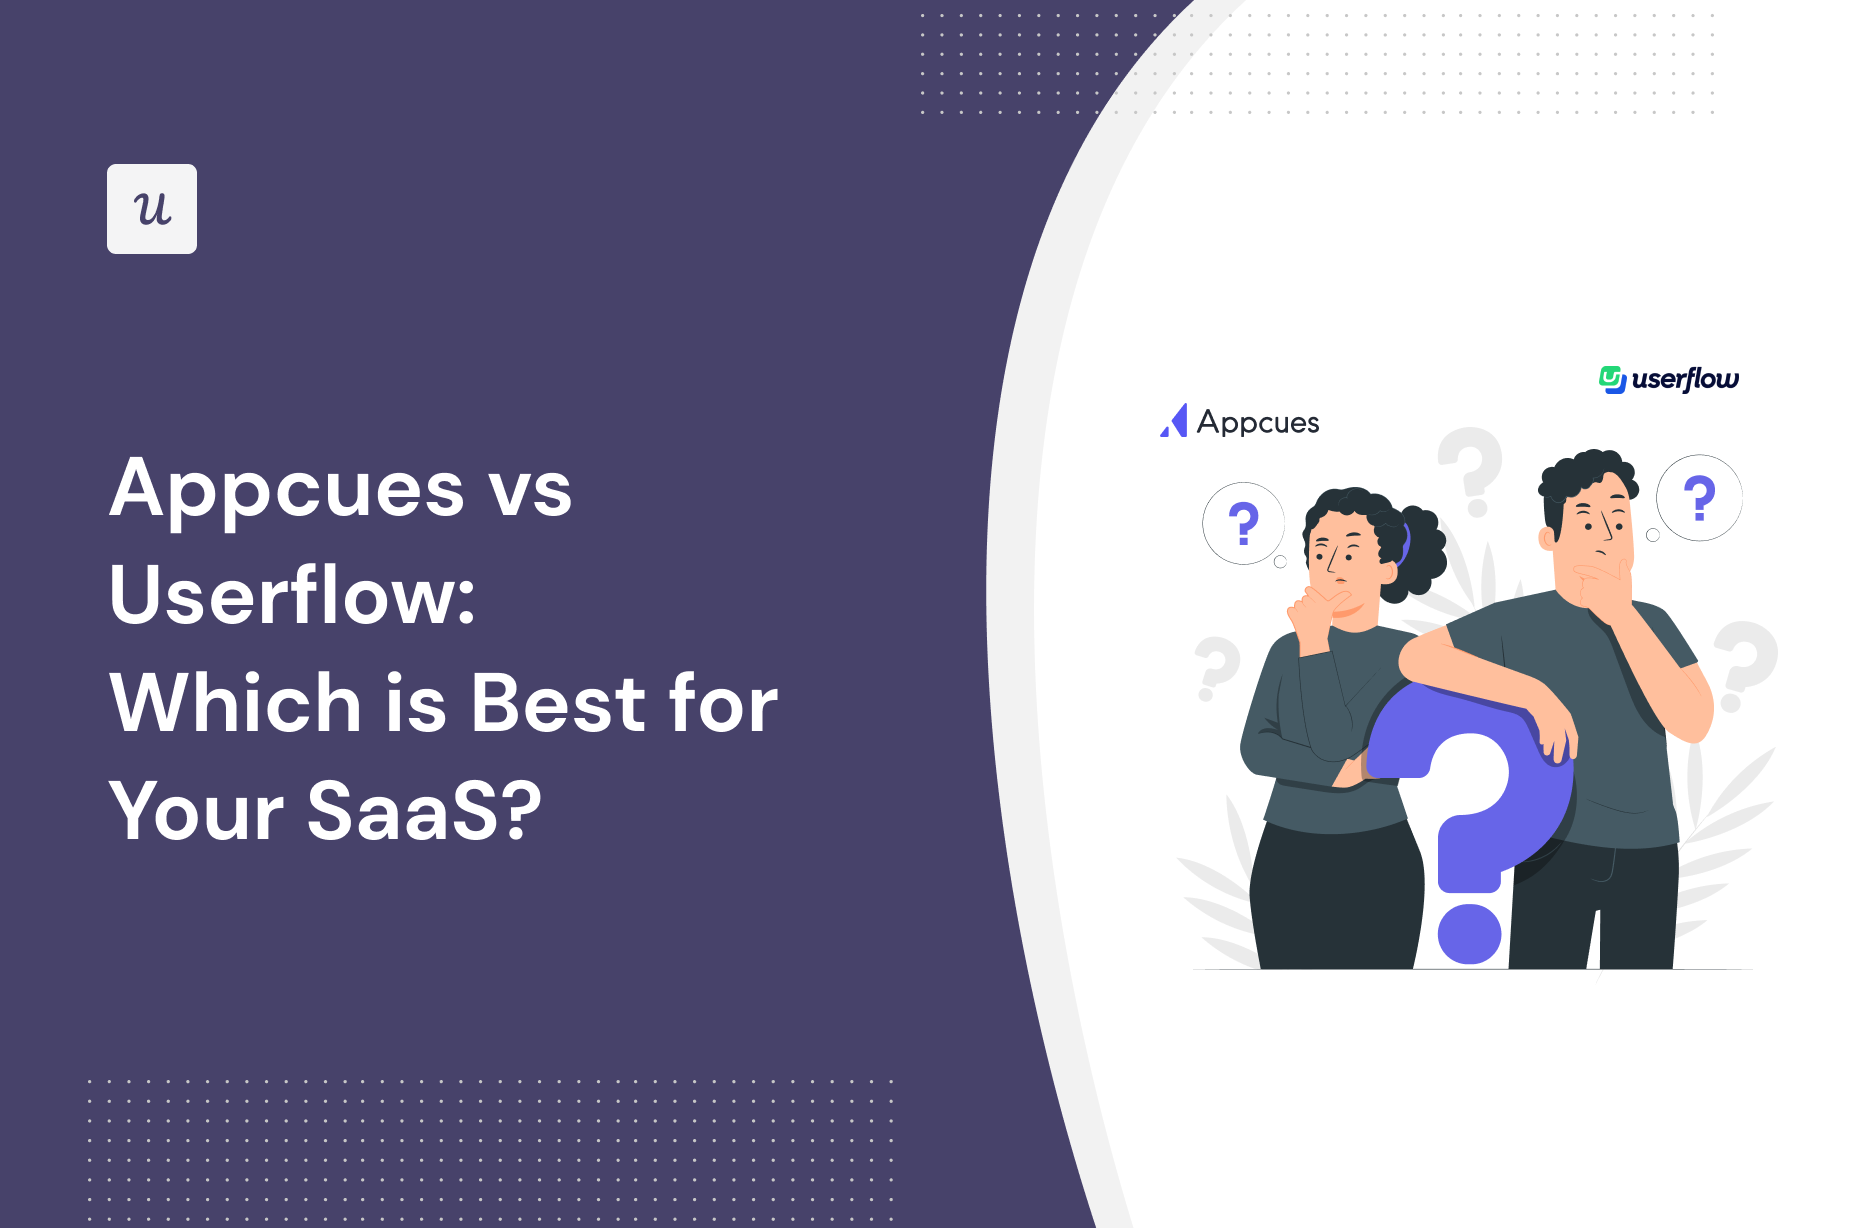 Appcues vs Userflow: Which is Best for Your SaaS?